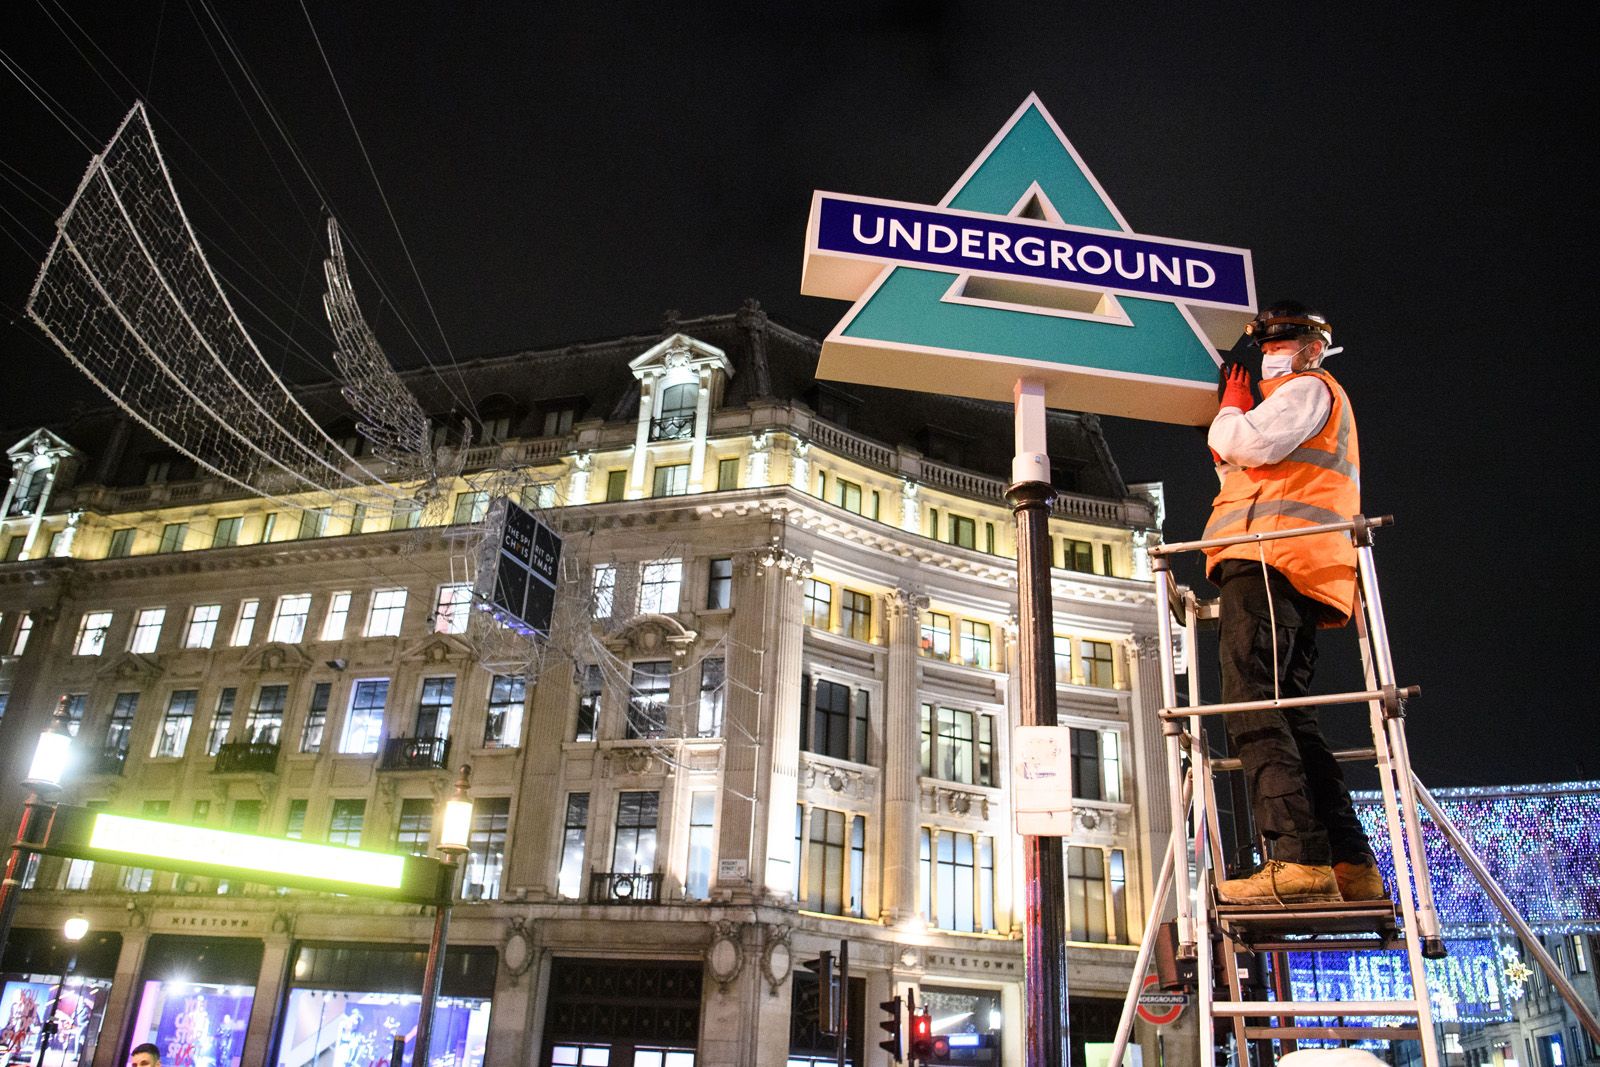 PlayStation takes over London Underground for UK PS5 launch - best stunt since OXO Tower photo 1